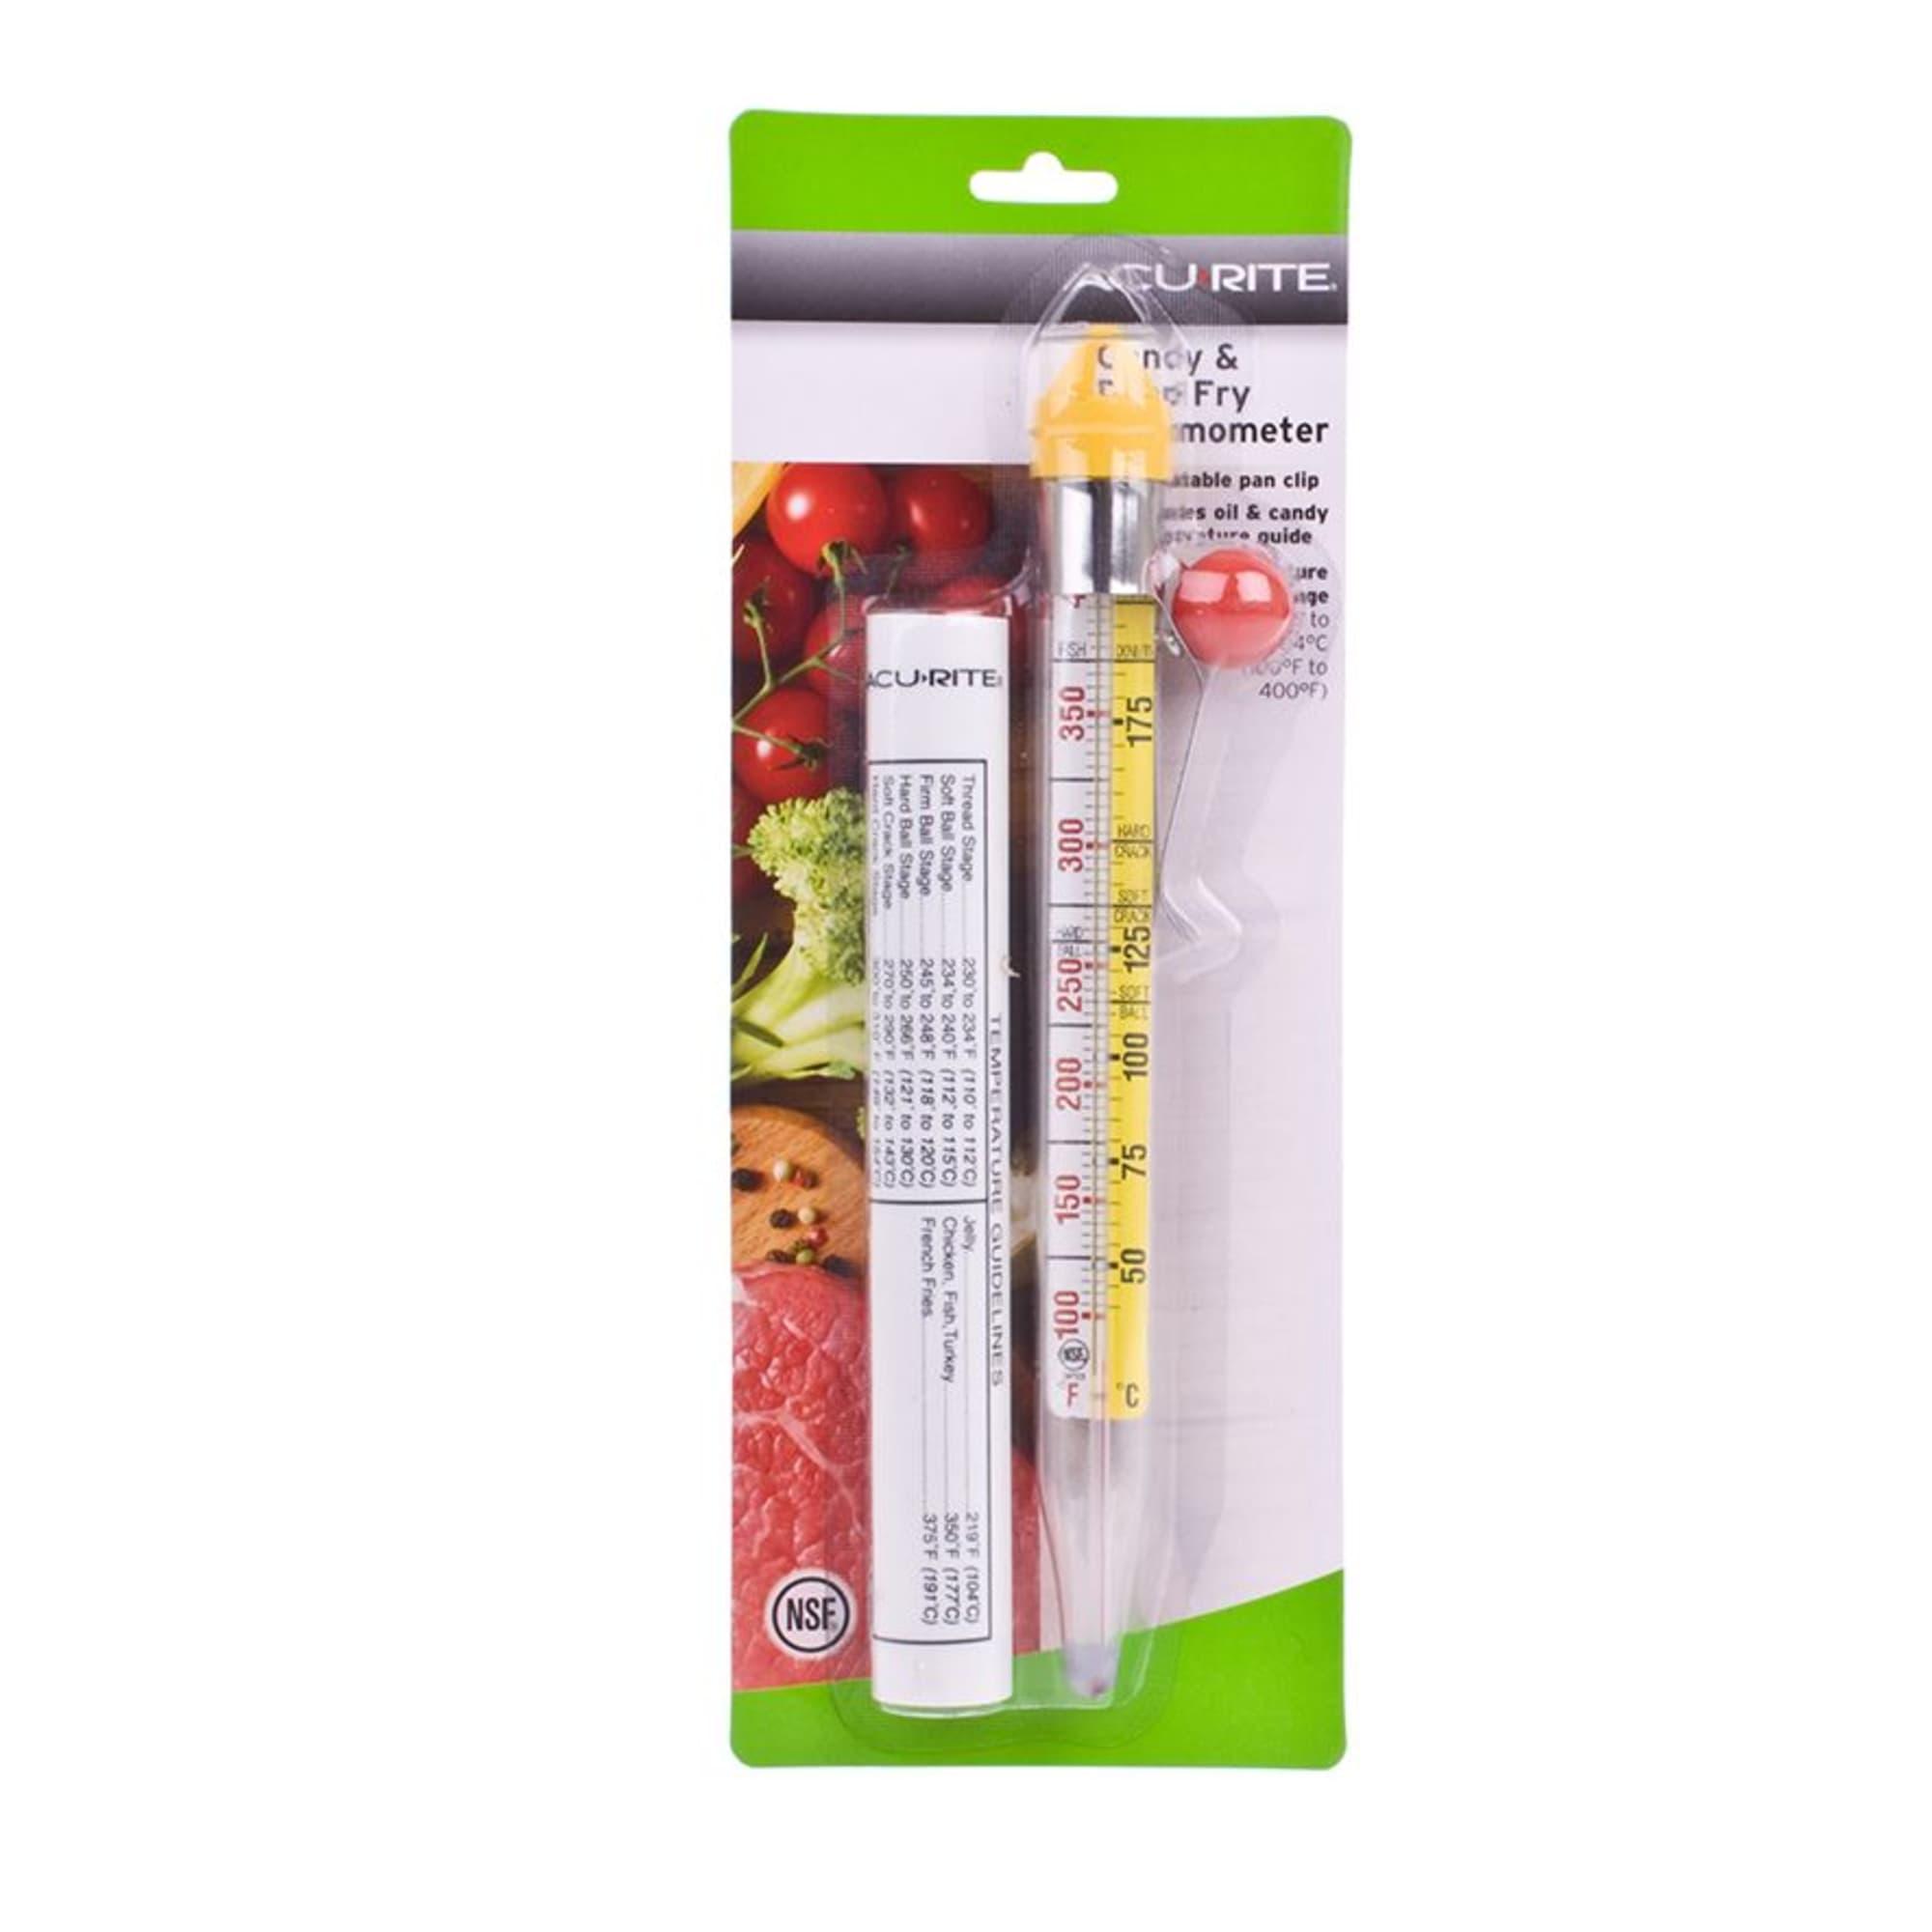 Acurite Deluxe Candy/Deep Fry Thermometer with Sheath Image 2